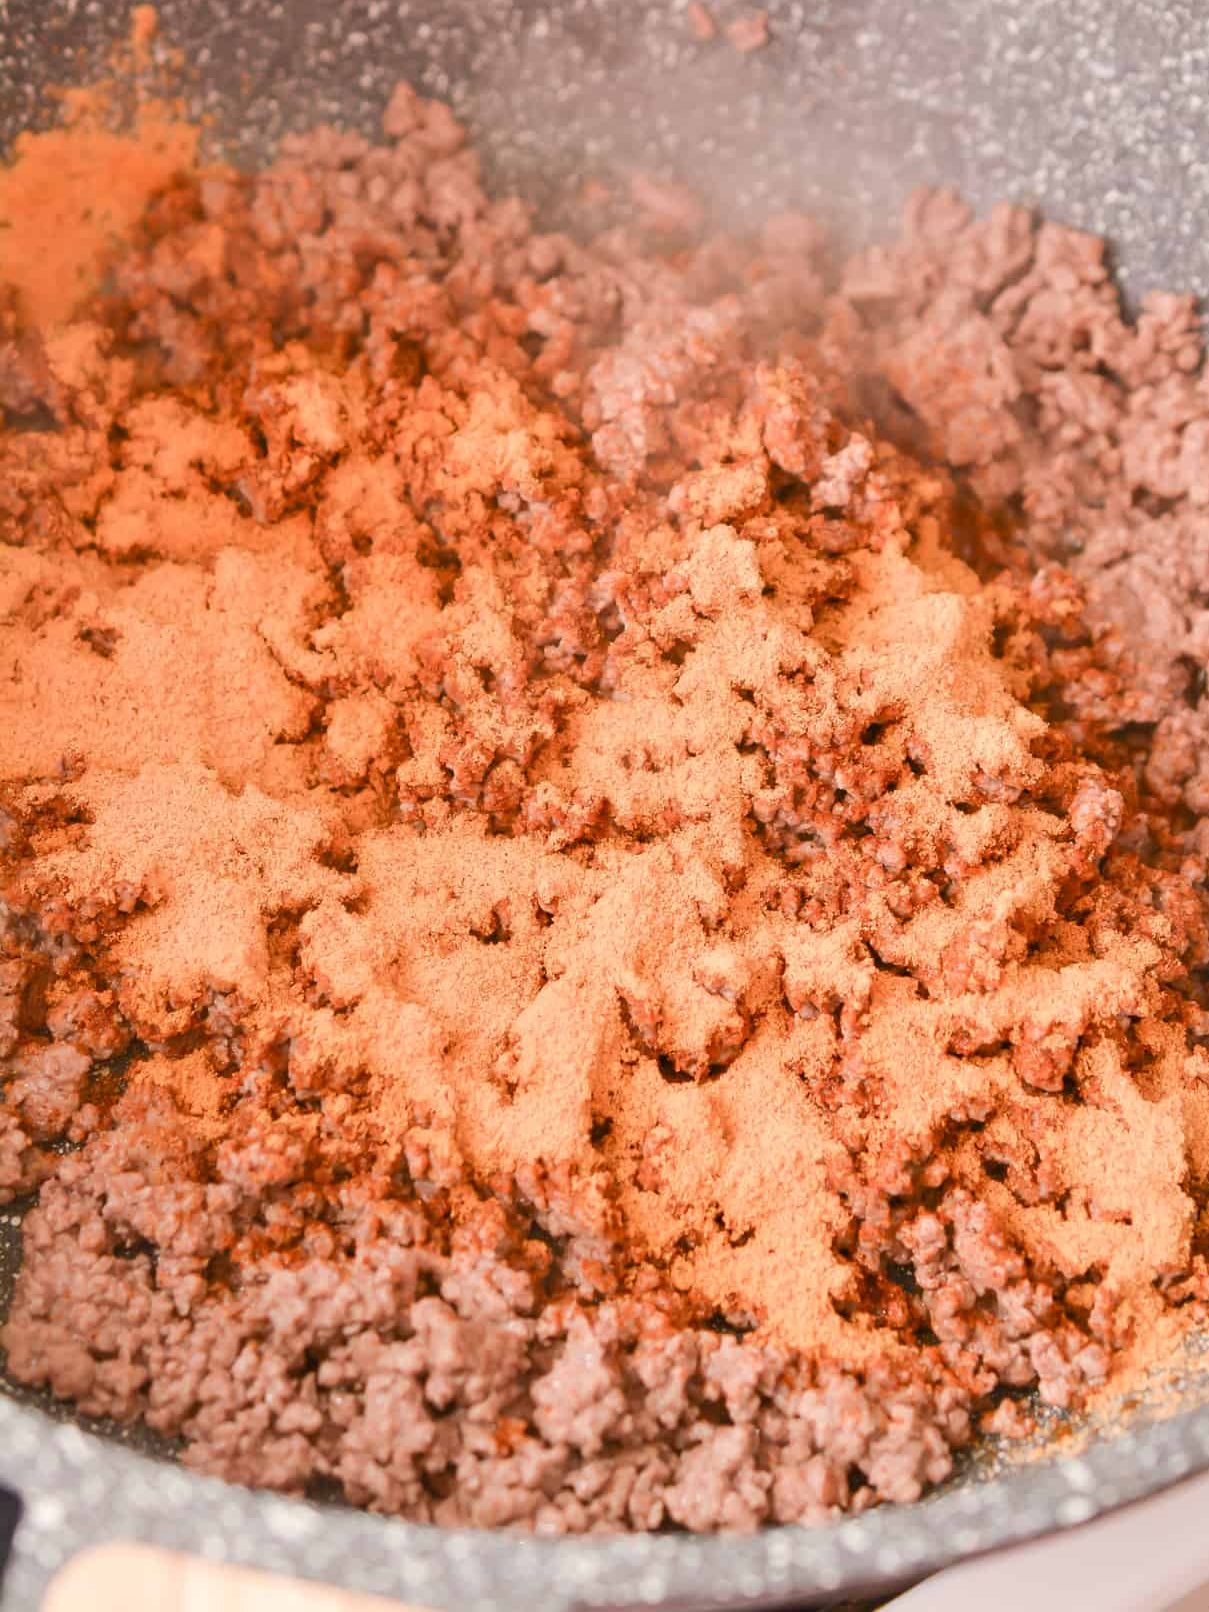 Stir the taco seasoning into the meat and set aside.